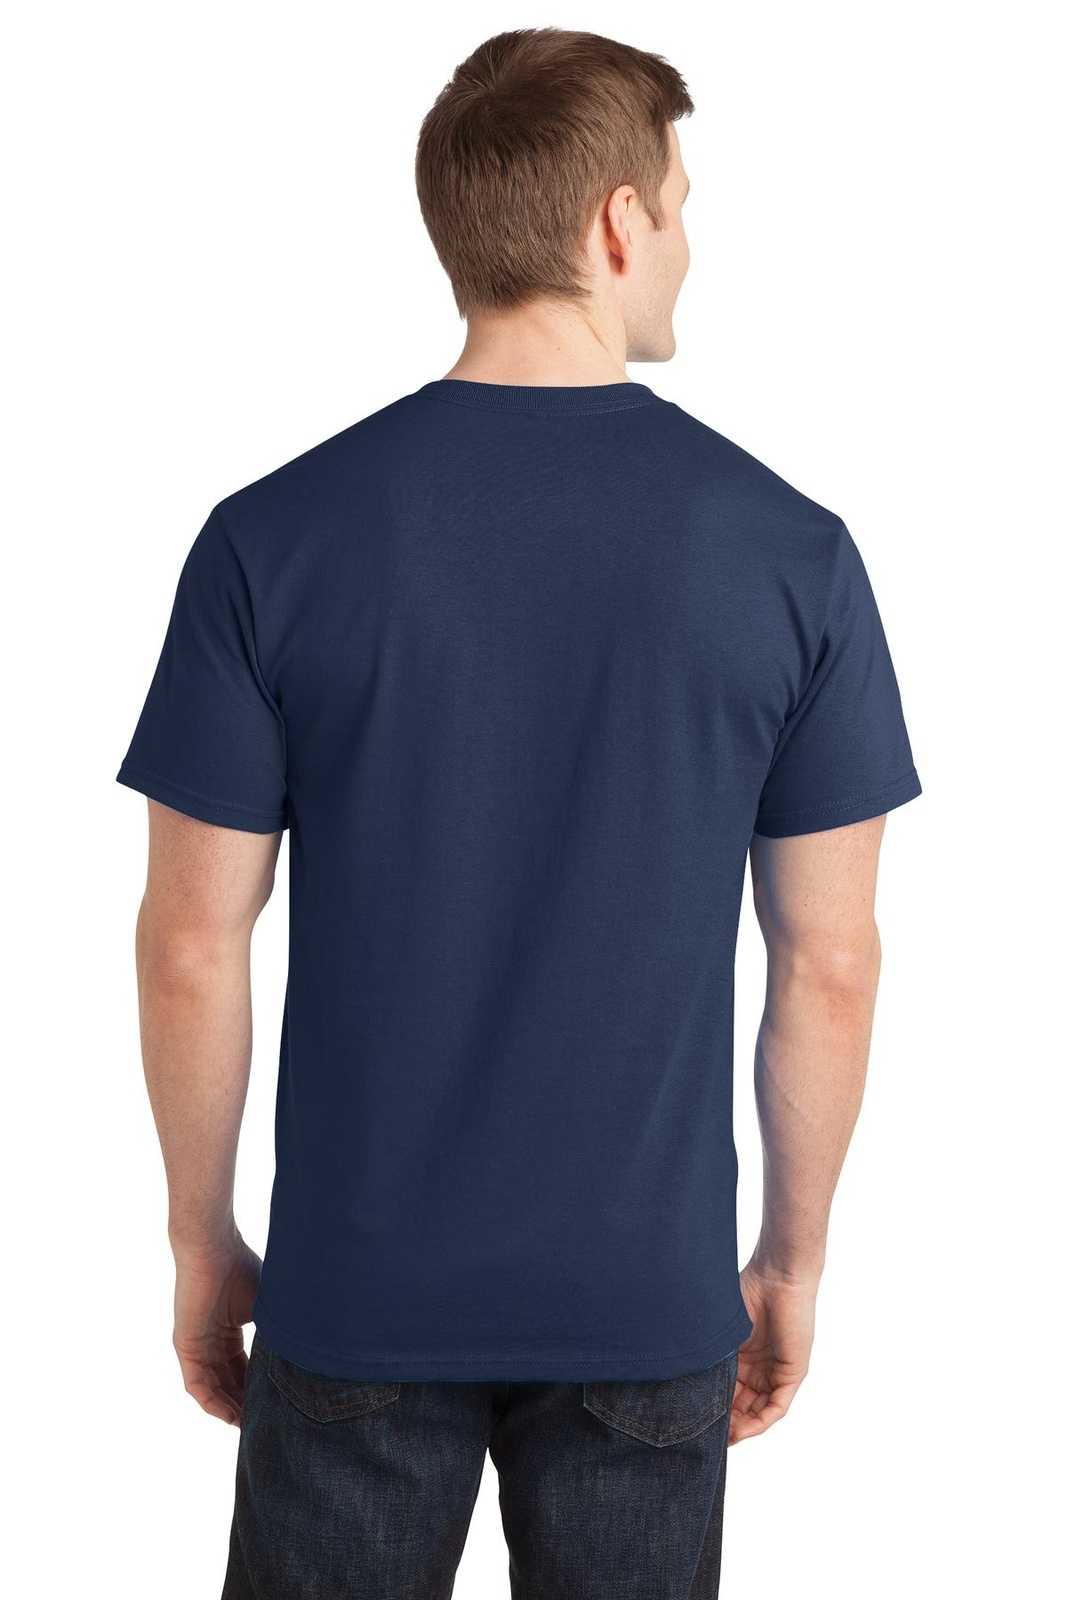 Port & Company PC150 Ring Spun Cotton Tee - Navy - HIT a Double - 1